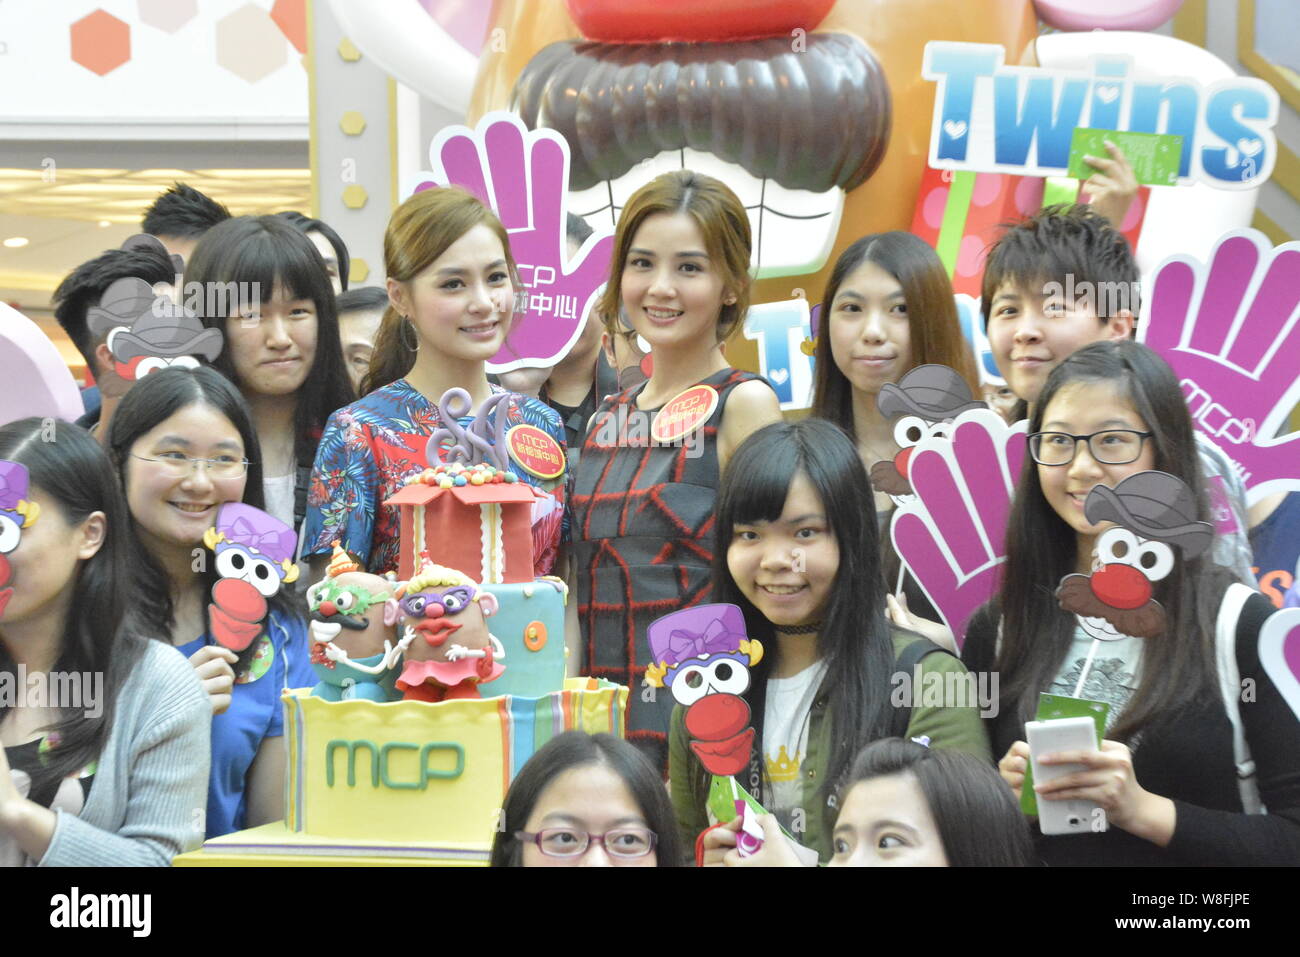 Gillian Chung, center left, and Charlene Choi, center right, of Hong Kong pop duo Twins pose with fans during the opening ceremony of Mr. Potato Head Stock Photo